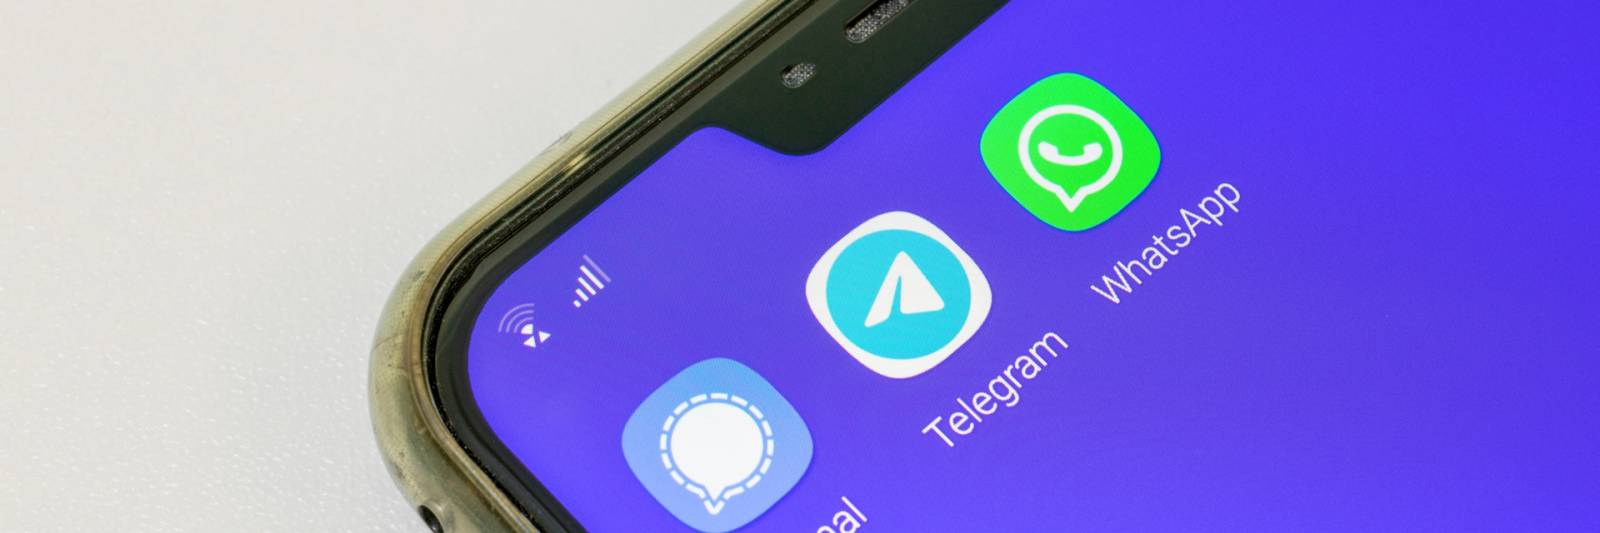 Whatsapp Presses Ahead With Privacy Changes Despite Backlash The